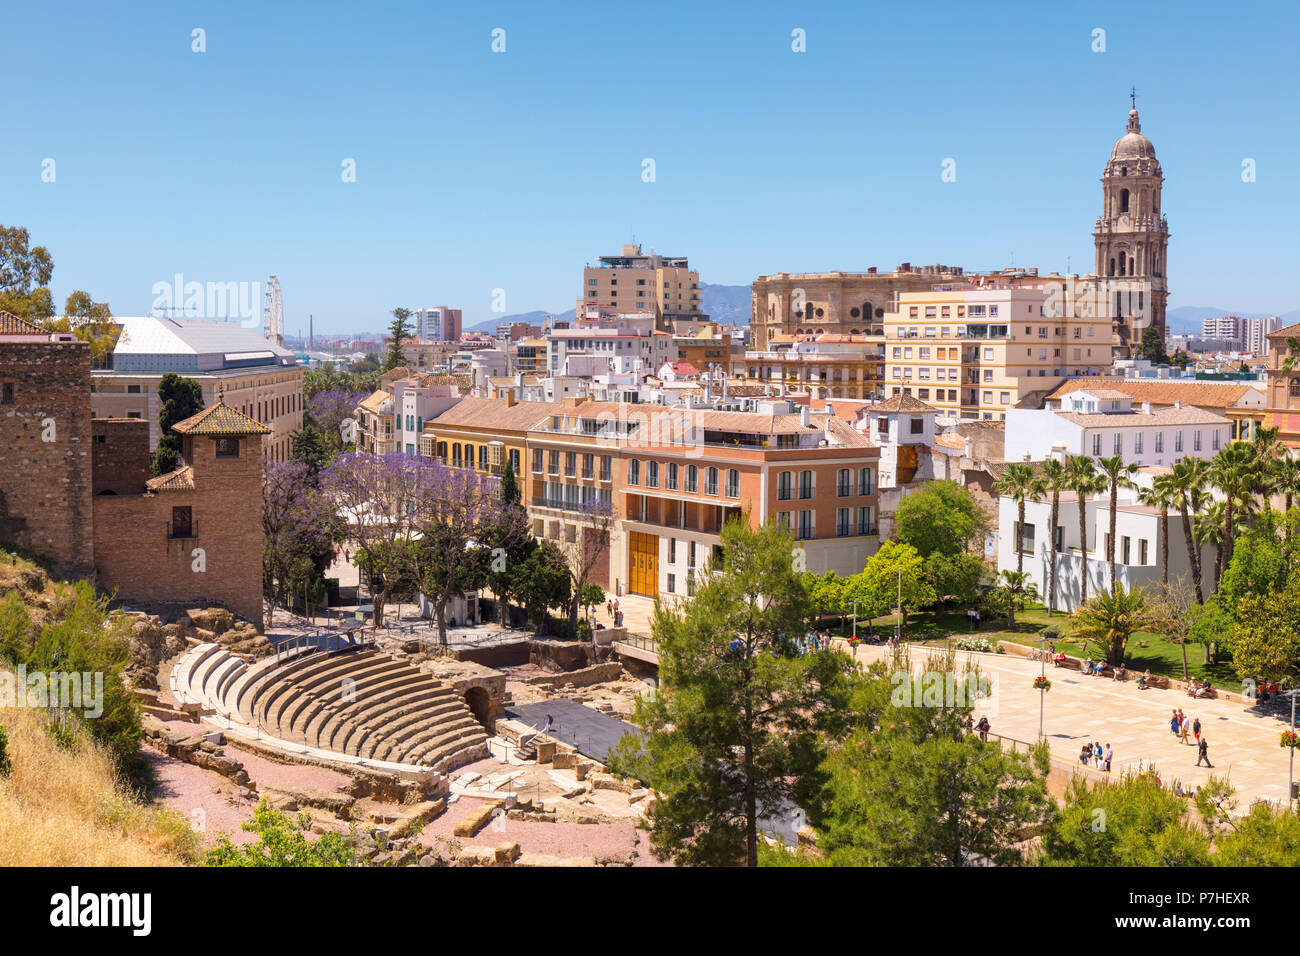 Malaga, Costa del Sol, Malaga Province, Andalusia, southern Spain. City view showing Roman theatre and cathedral. The Alcazaba can be seen to the left Stock Photo